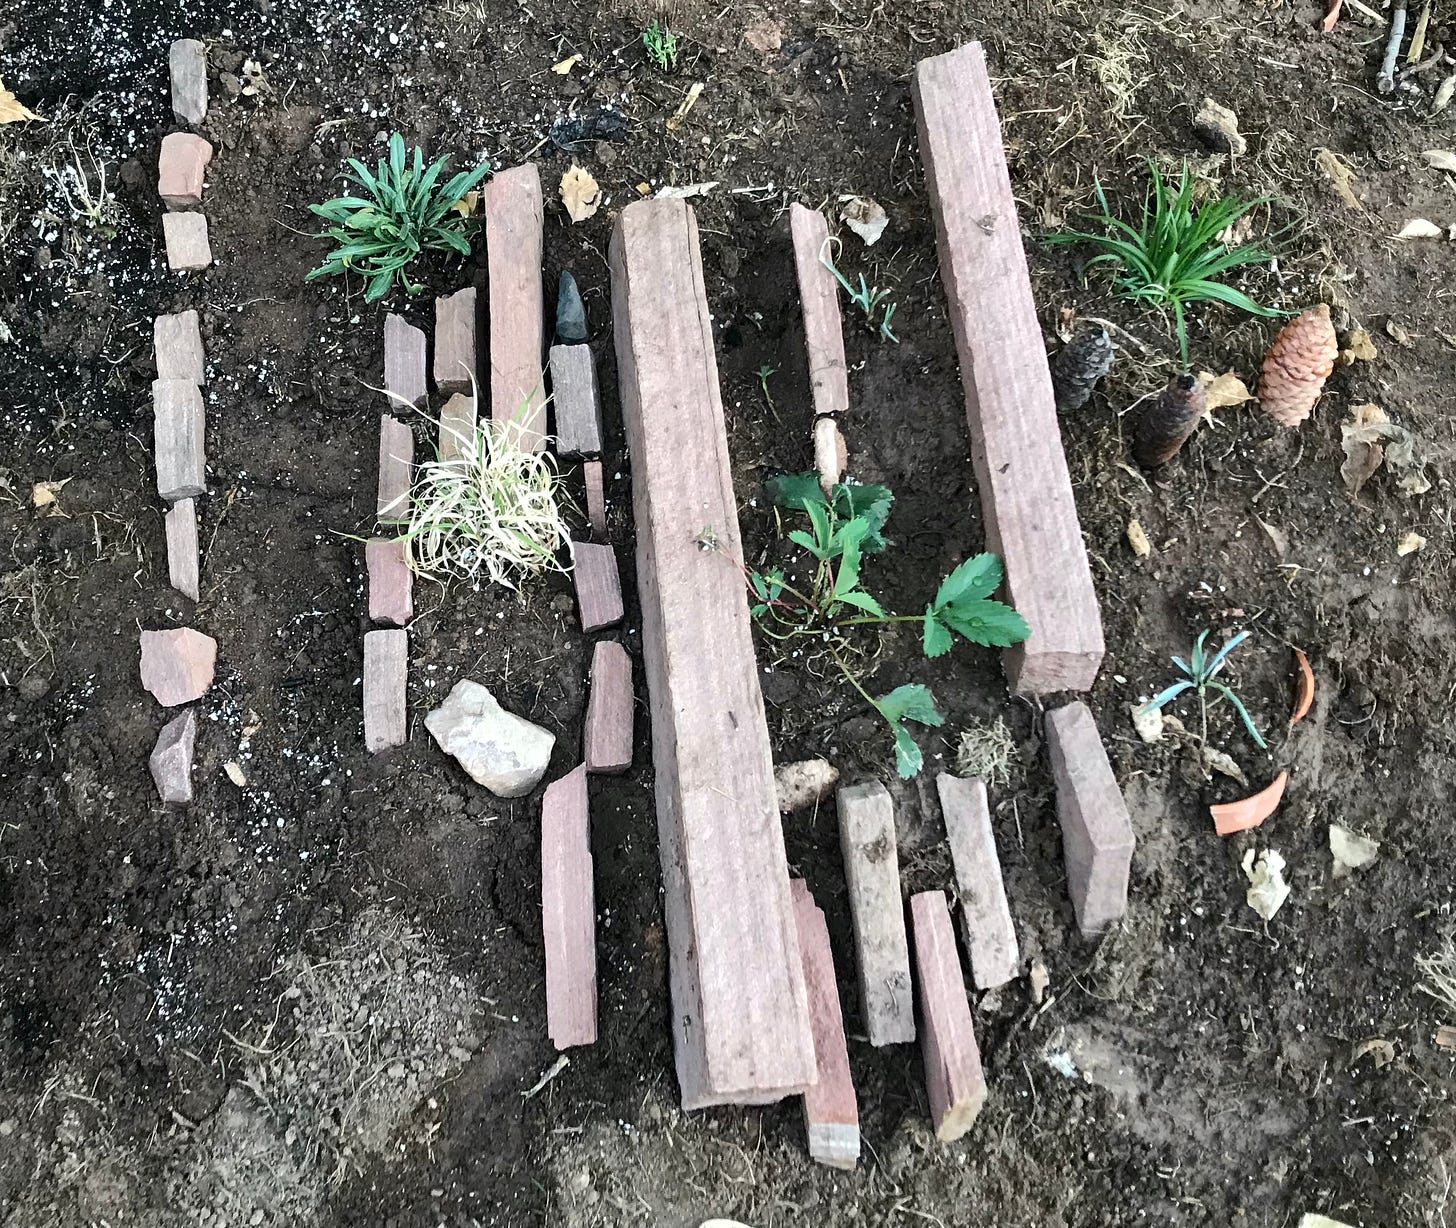 Long thin sandstone pieces with plants wedged in between on a small soil mound